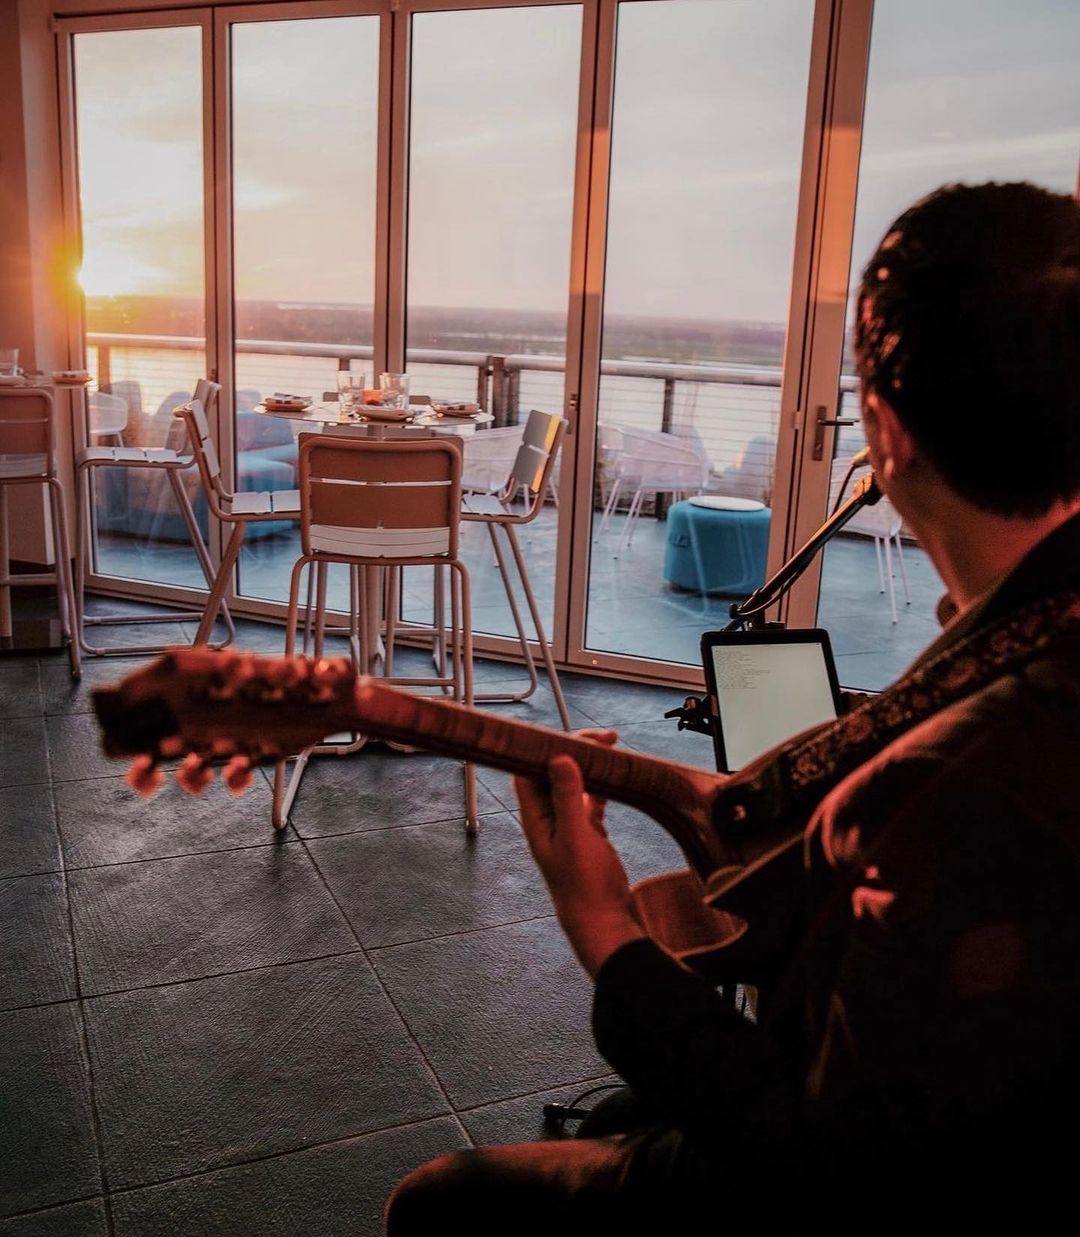 A man playing an acoustic guitar on a rooftop at sunset.